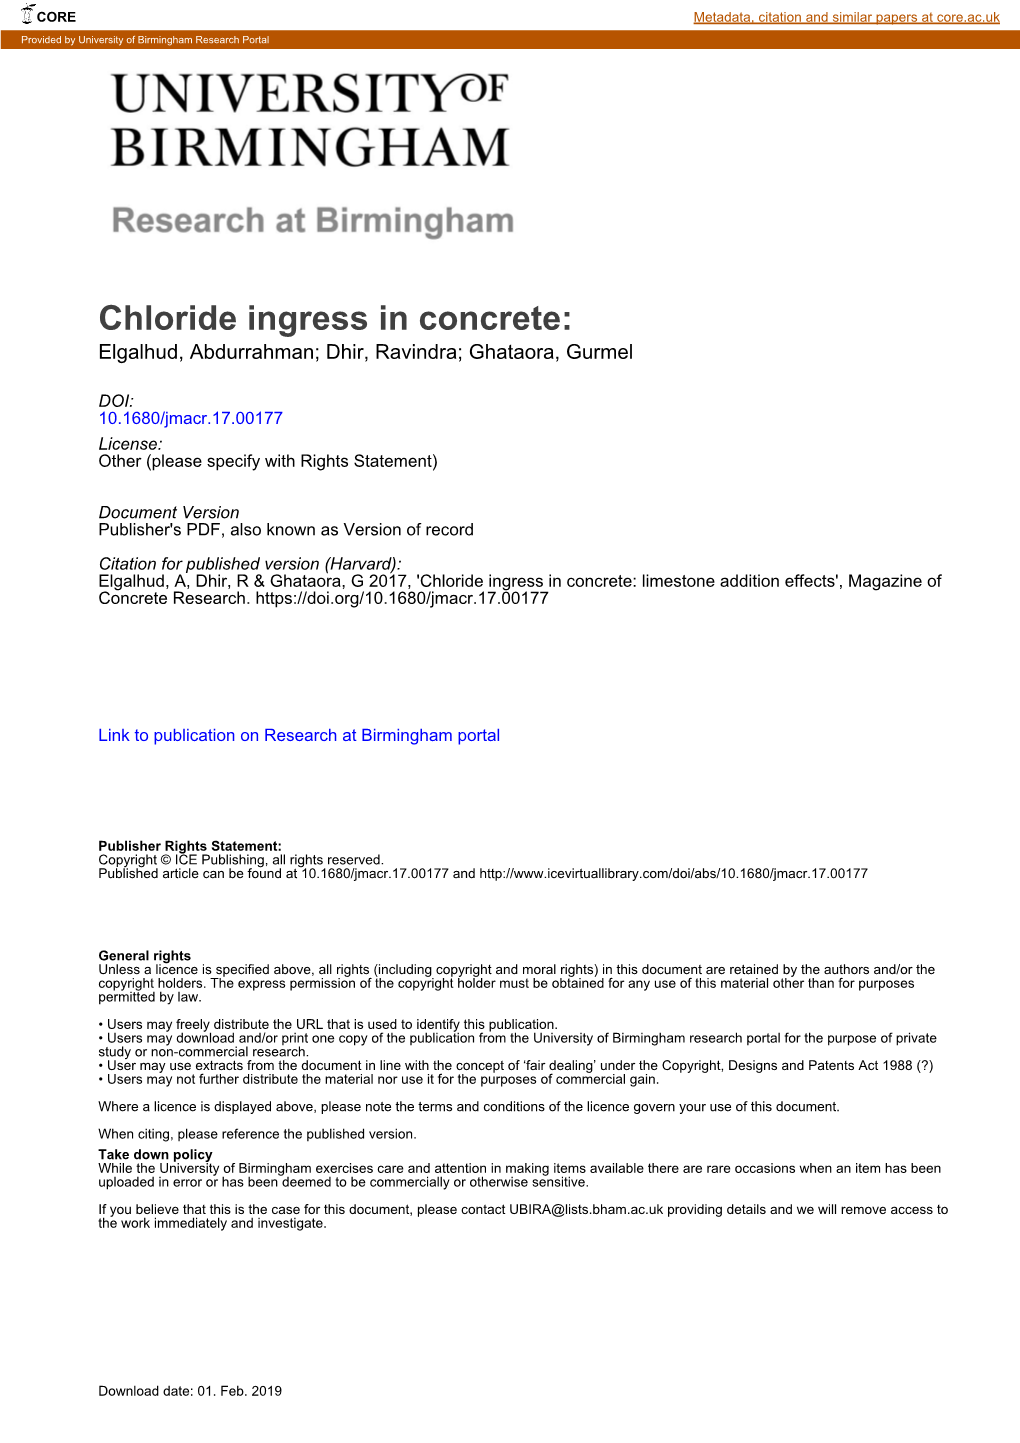 Chloride Ingress in Concrete: Limestone Addition Effects', Magazine of Concrete Research